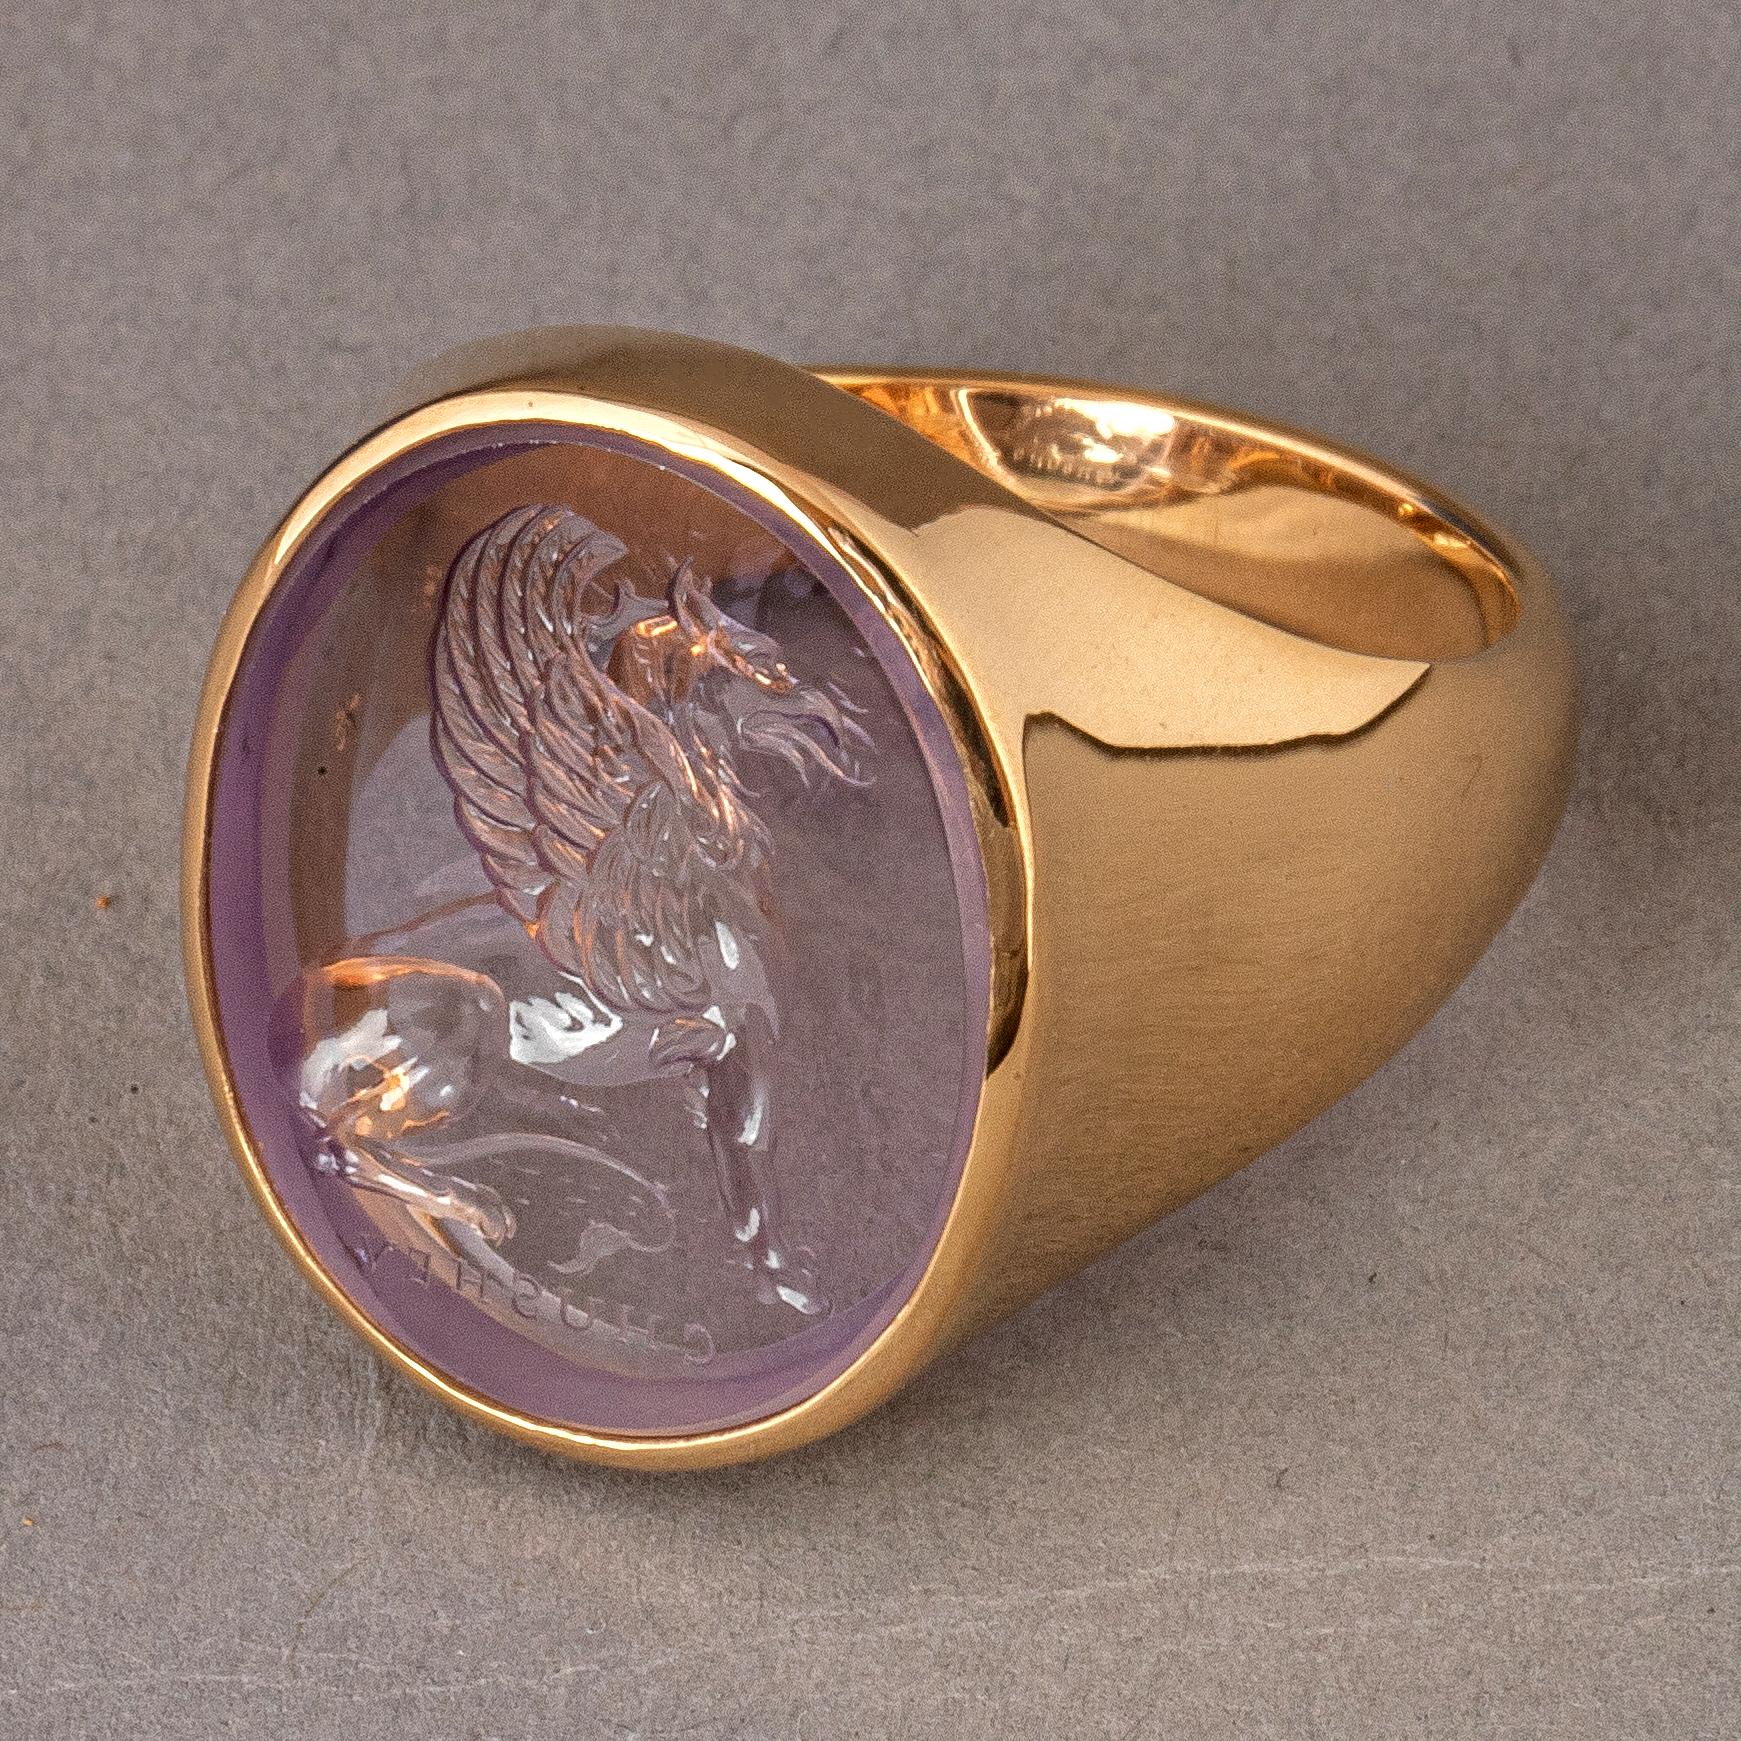 This exquisite intaglio is engraved onto amethyst crystal and features a griffin, which throughout history, has been regarded as a protective creature. The amethyst stone is set in an 18K signet ring.

Production time for this piece is 4-6